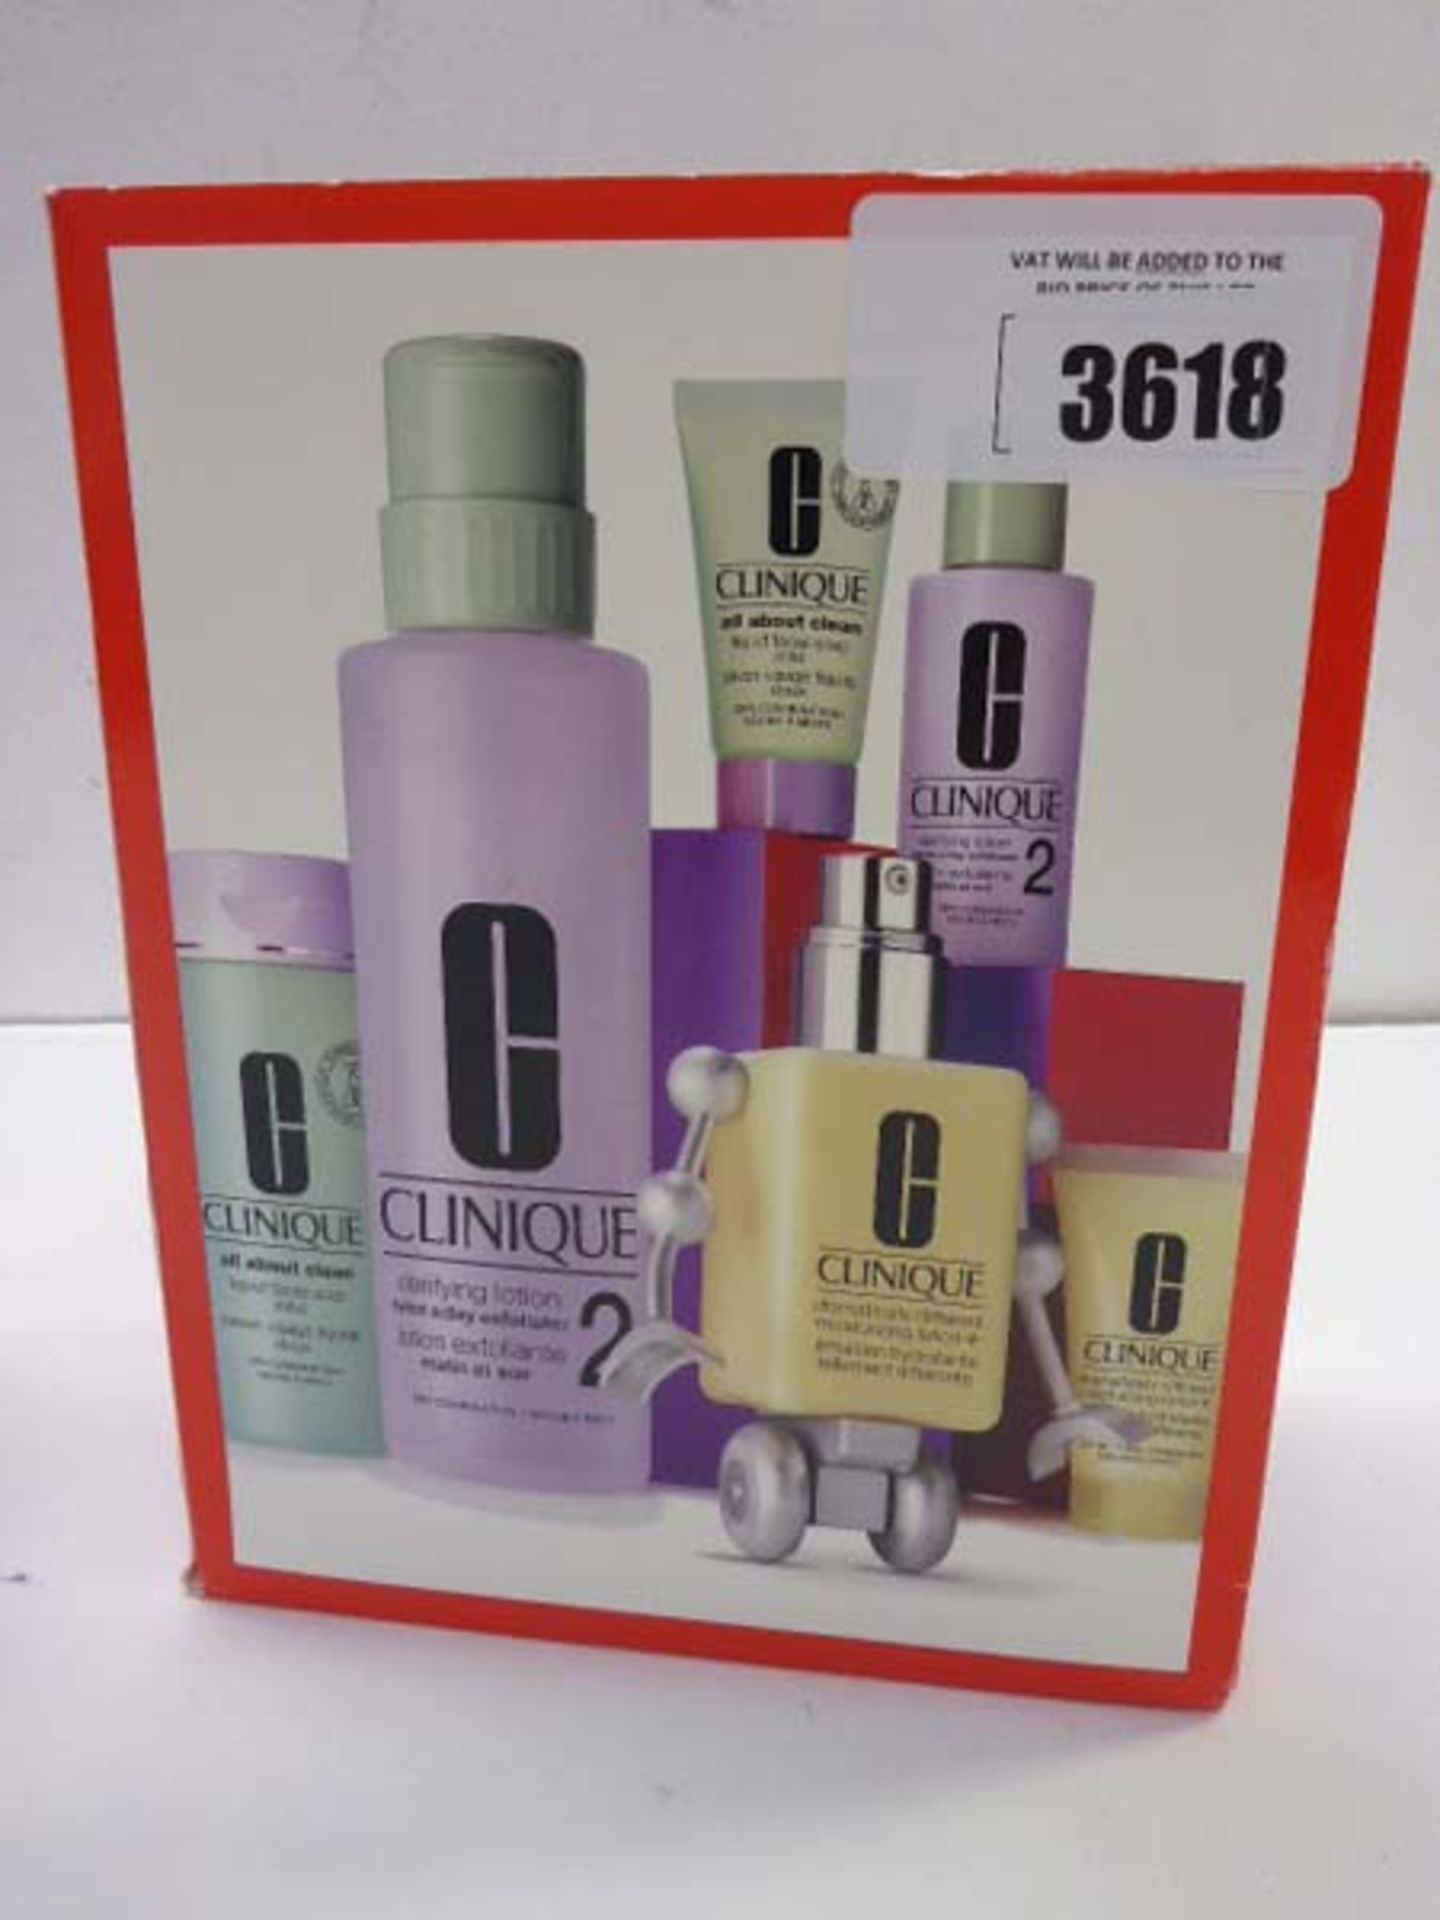 Clinique - 'Great Skin Everywhere' Skin care Gift Set